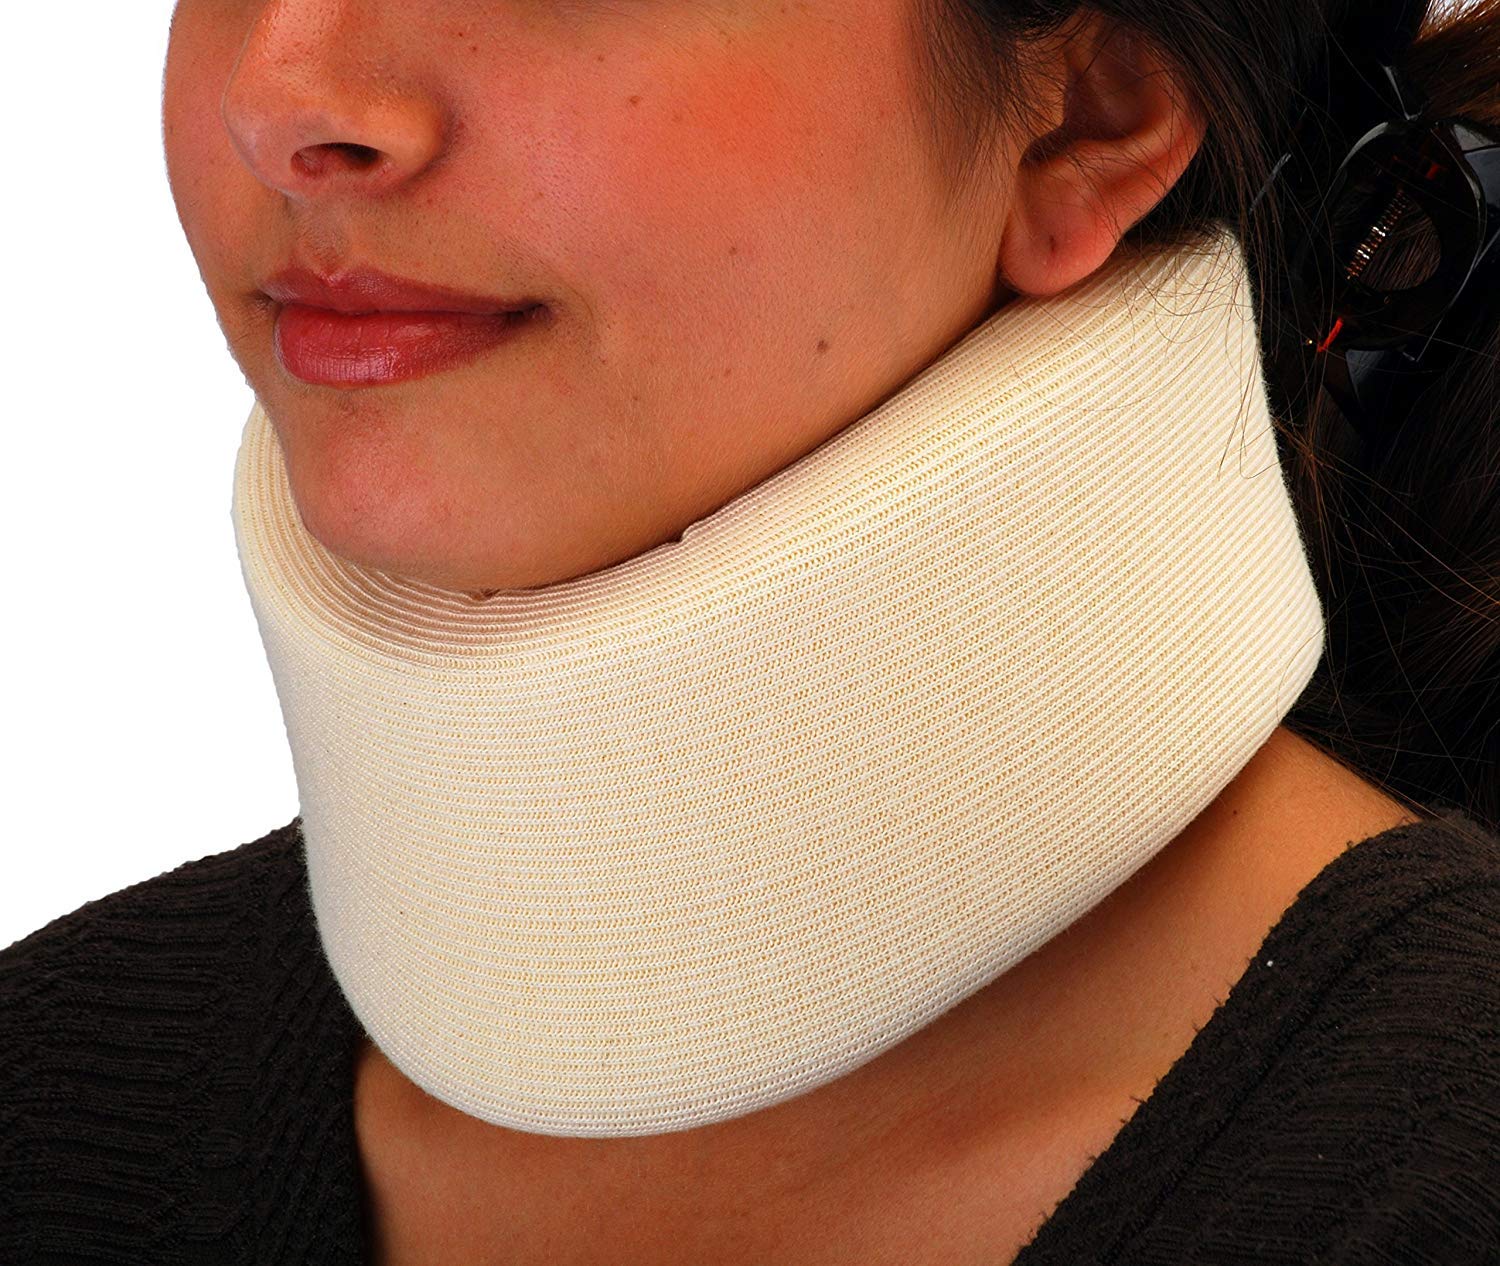 NOVA Neck Brace, Foam Cushion Cervical Collar, Soft & Breathable Removable Cover, Easy to Adjust and Secure, Comes in 3 Neck Height Sizes: 2.75, 3.5 & 4